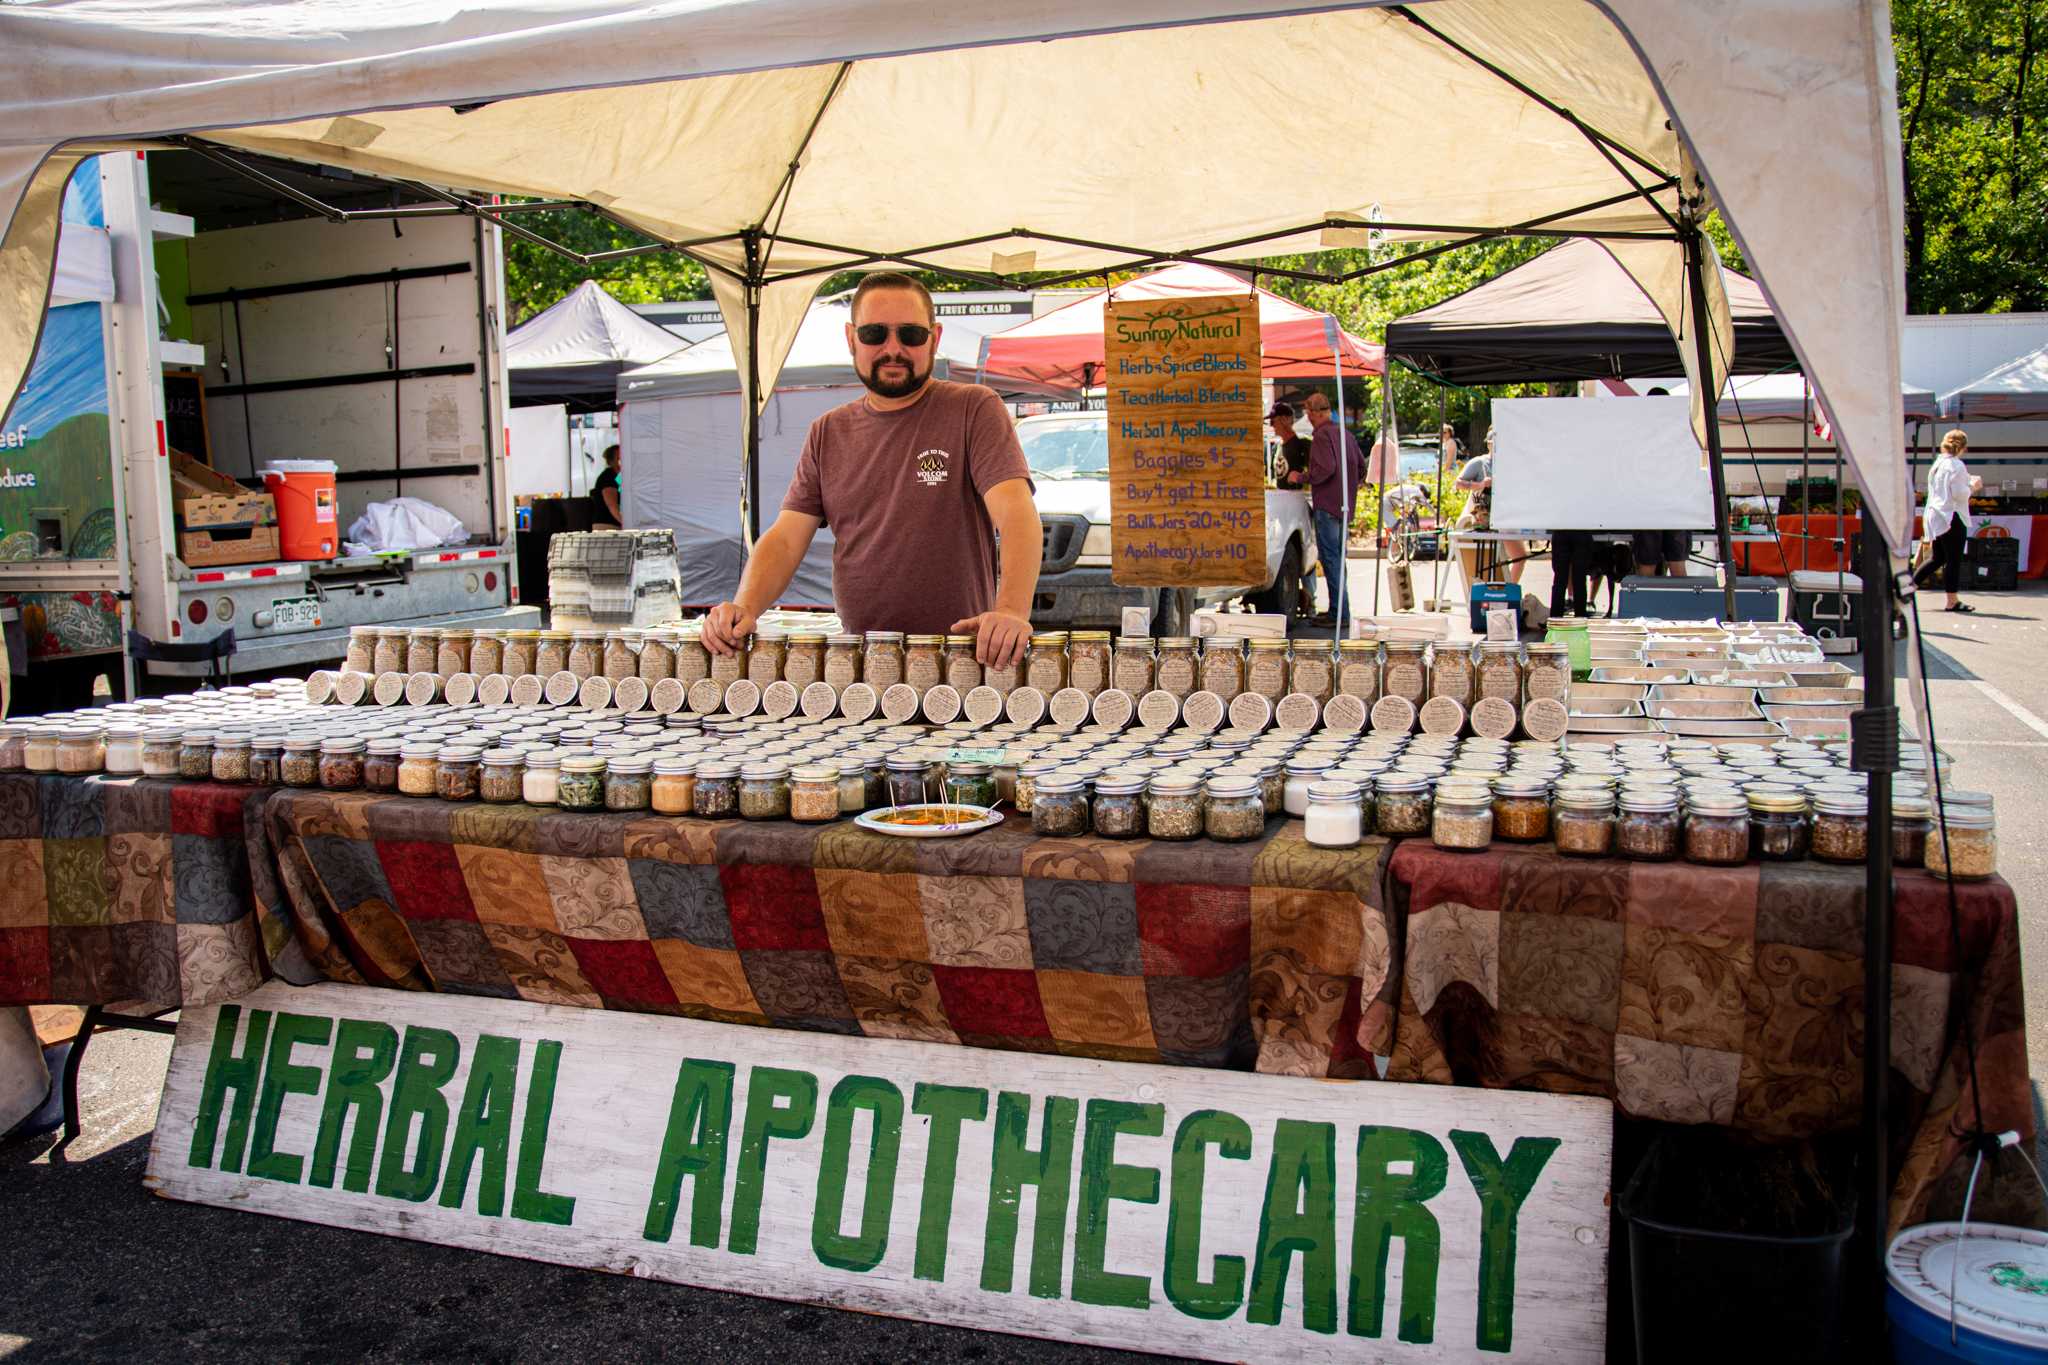 Josh Hillhouse stationed at Herbal Apothecary